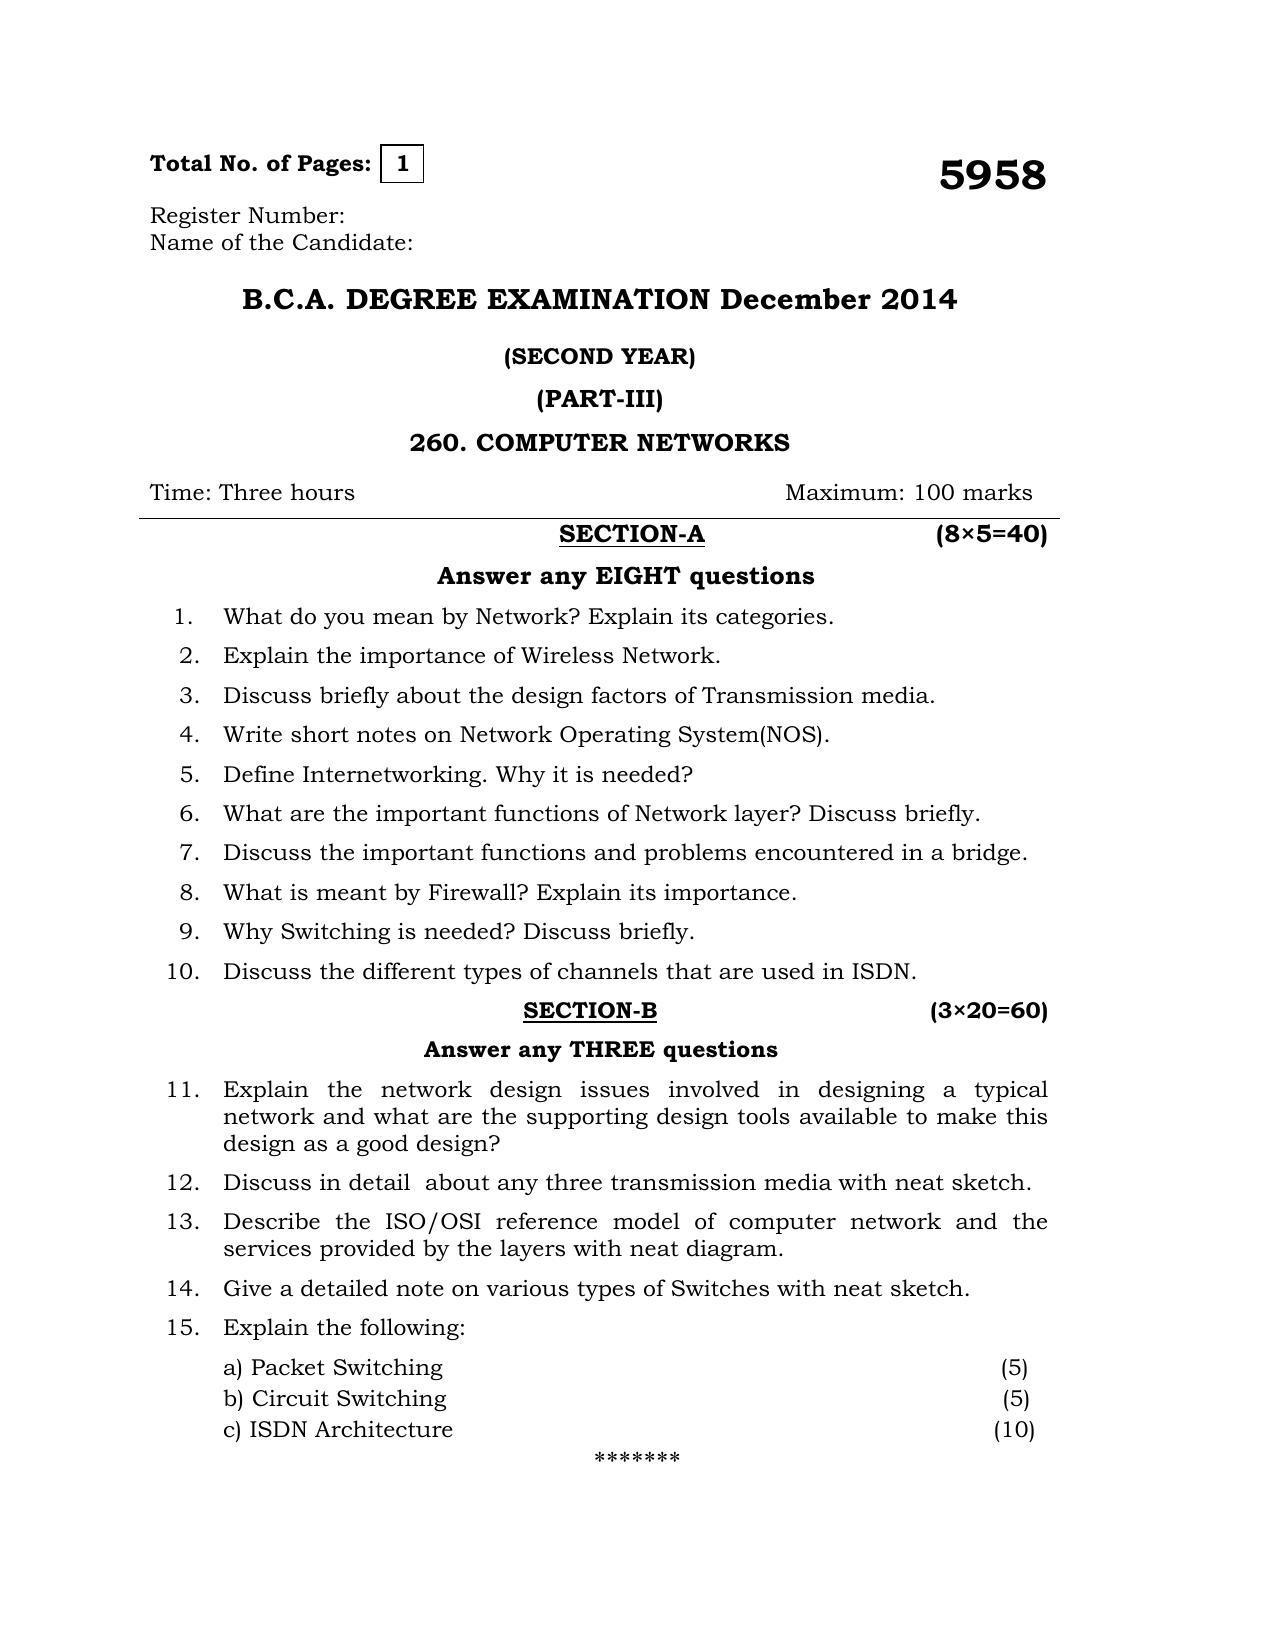 Annamalai University Computer Networks B.C.A. (OUS) December 2014 Question Papers - Page 1